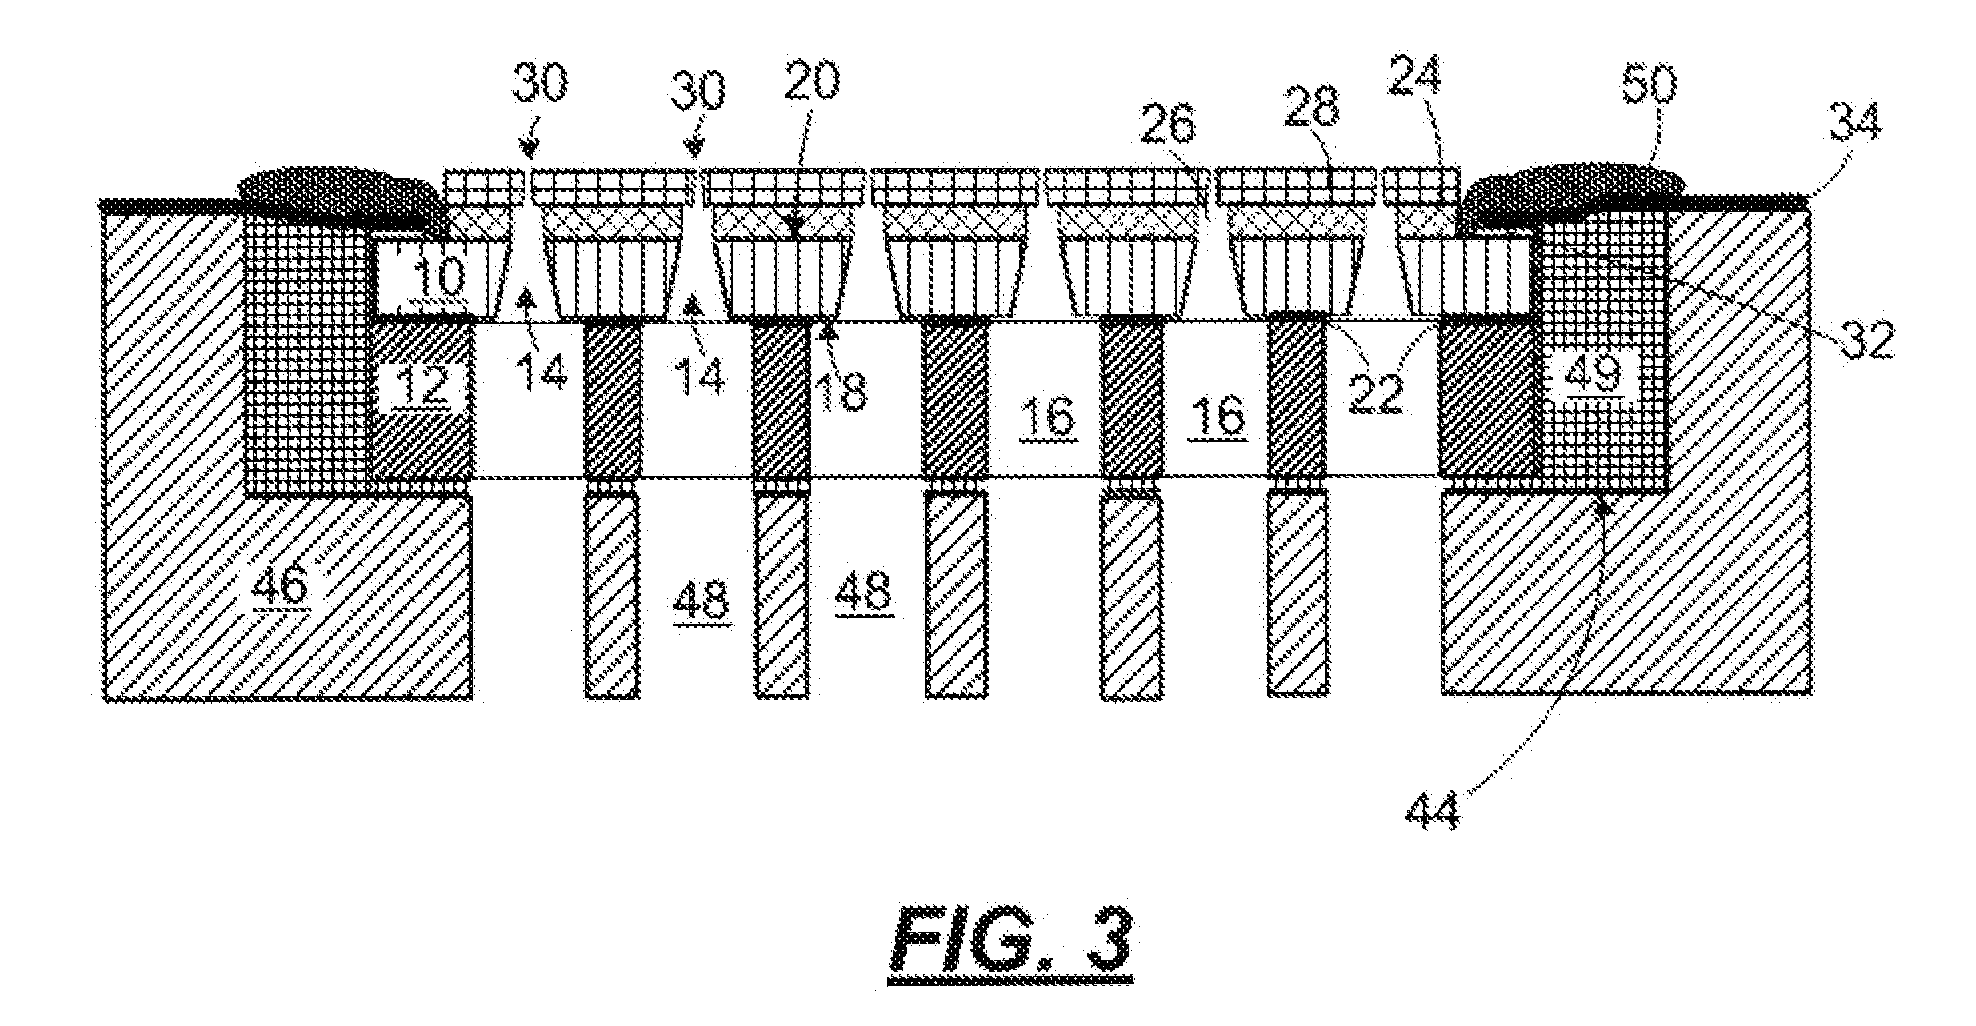 Micro-fluid ejection heads and methods for bonding substrates to supports